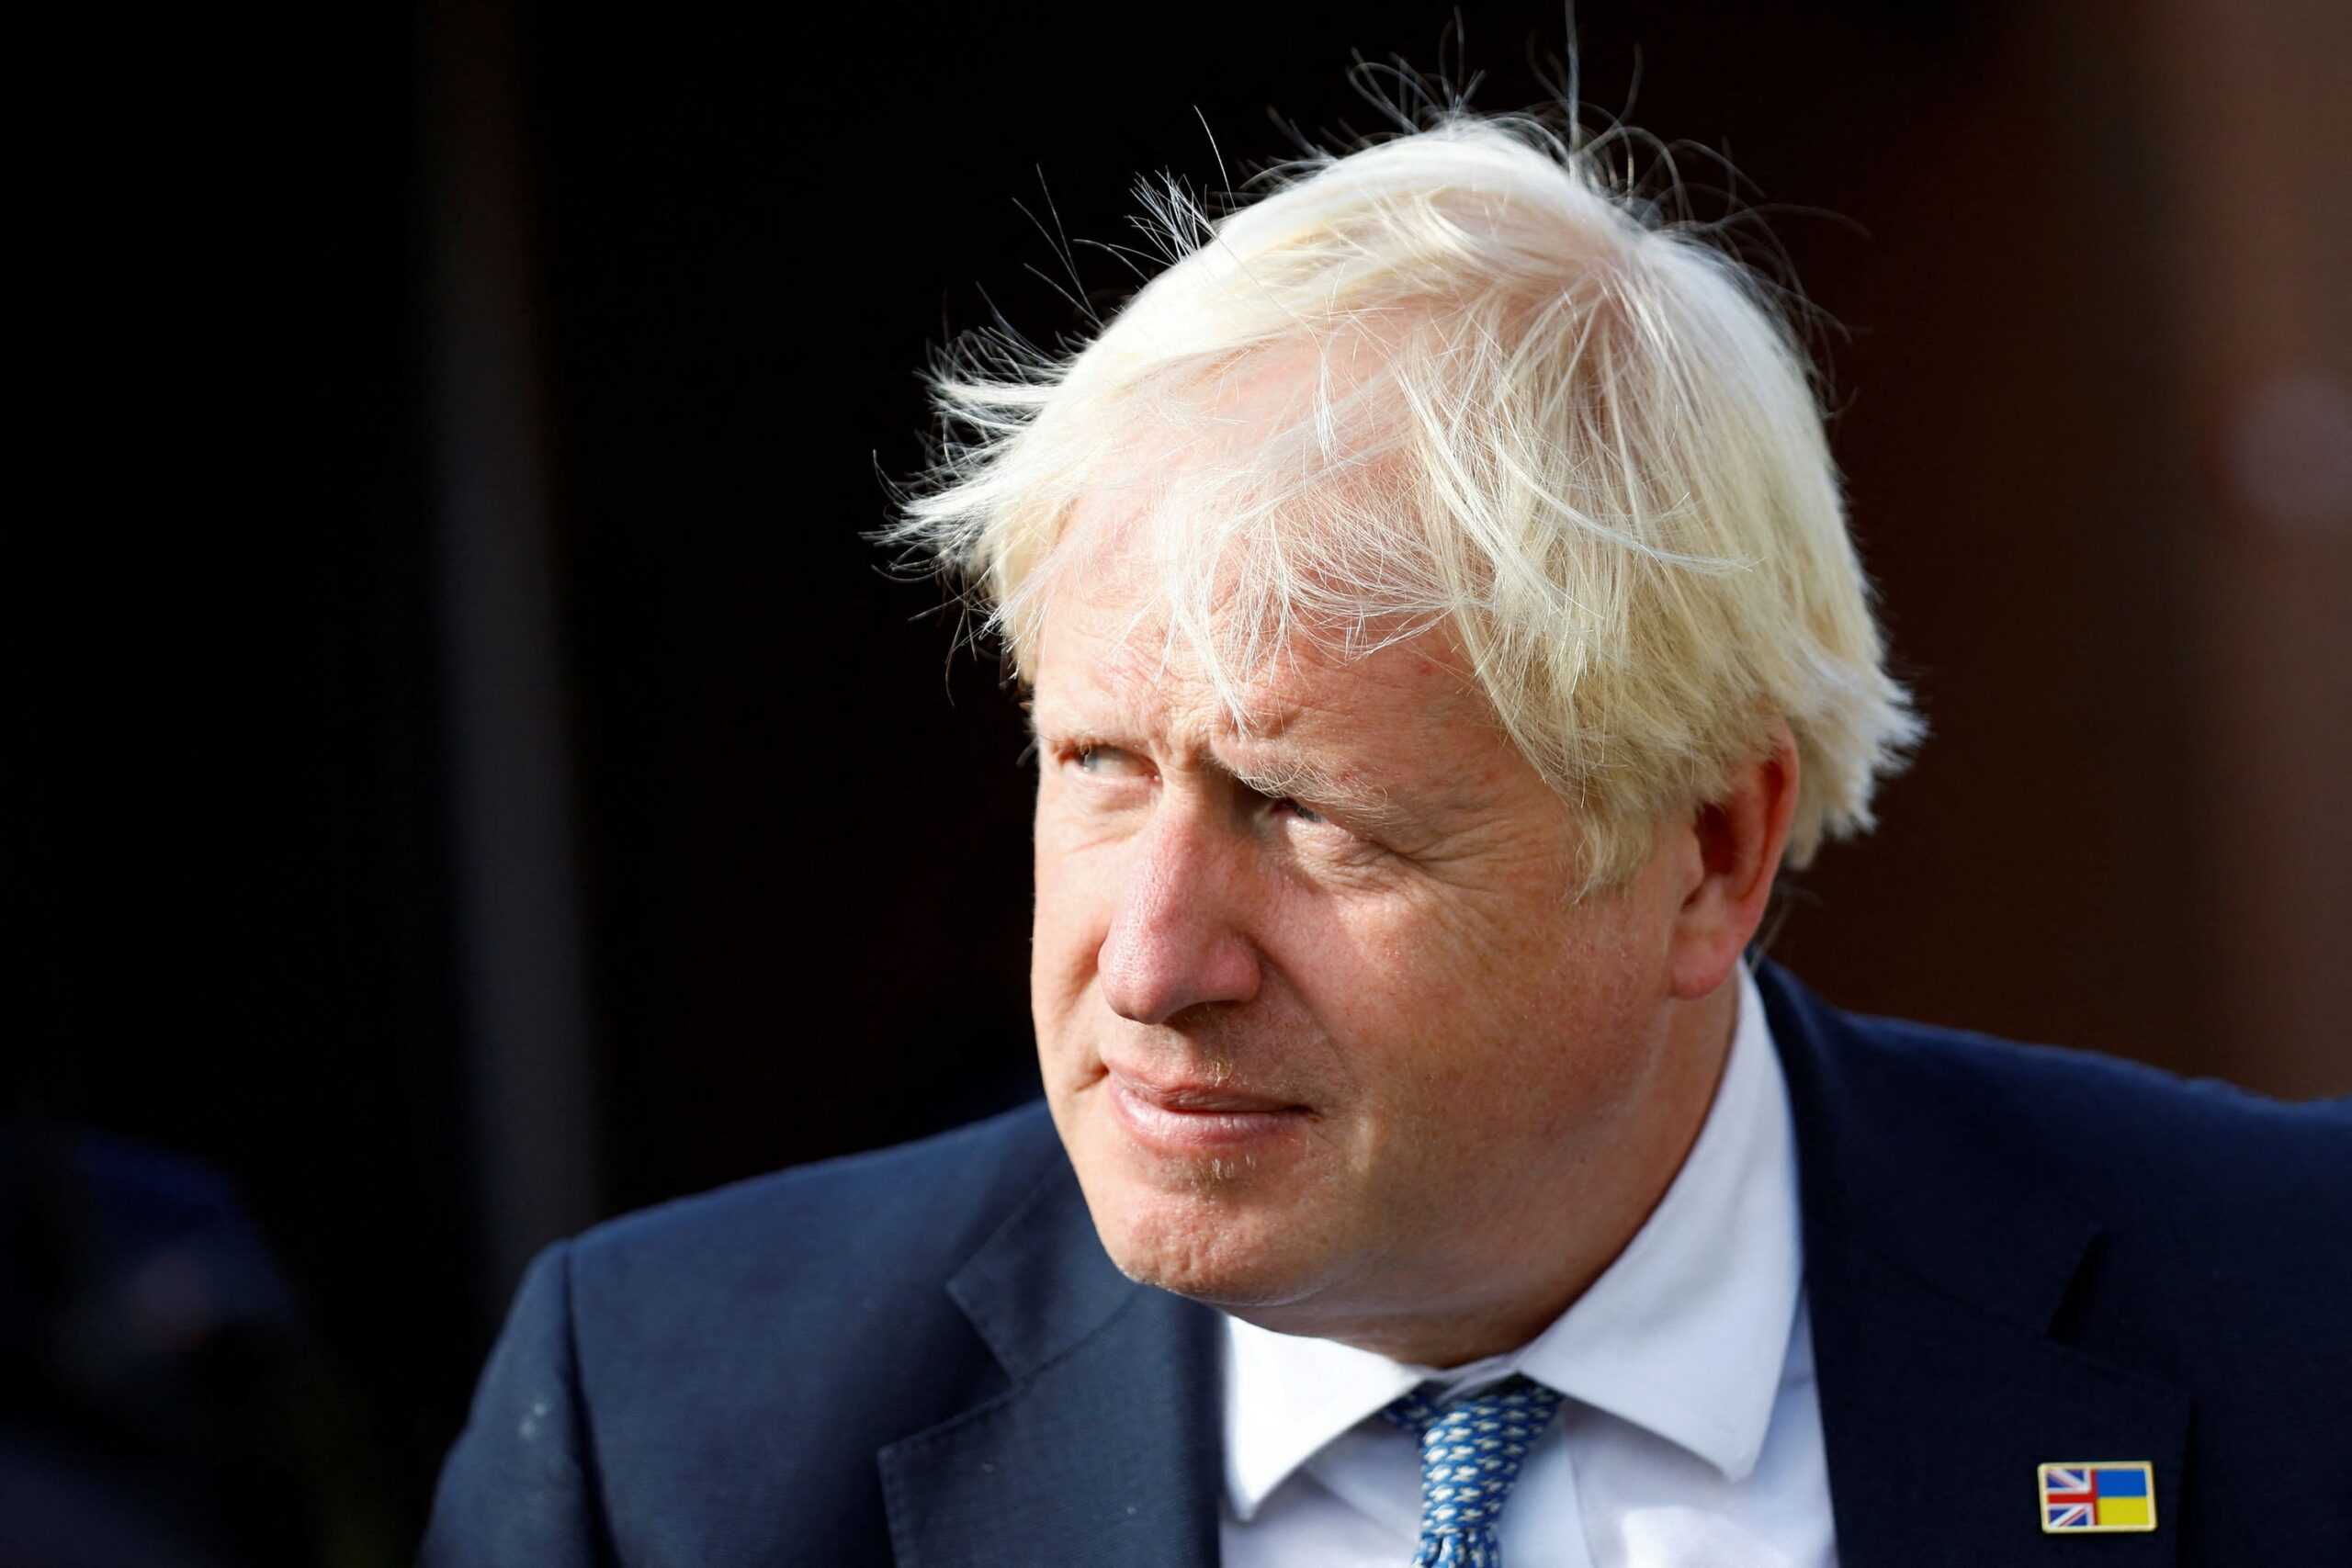 ‘Johnson is leaving as a disgraced PM – so why did he get a resignation honours list?’ – Bryant